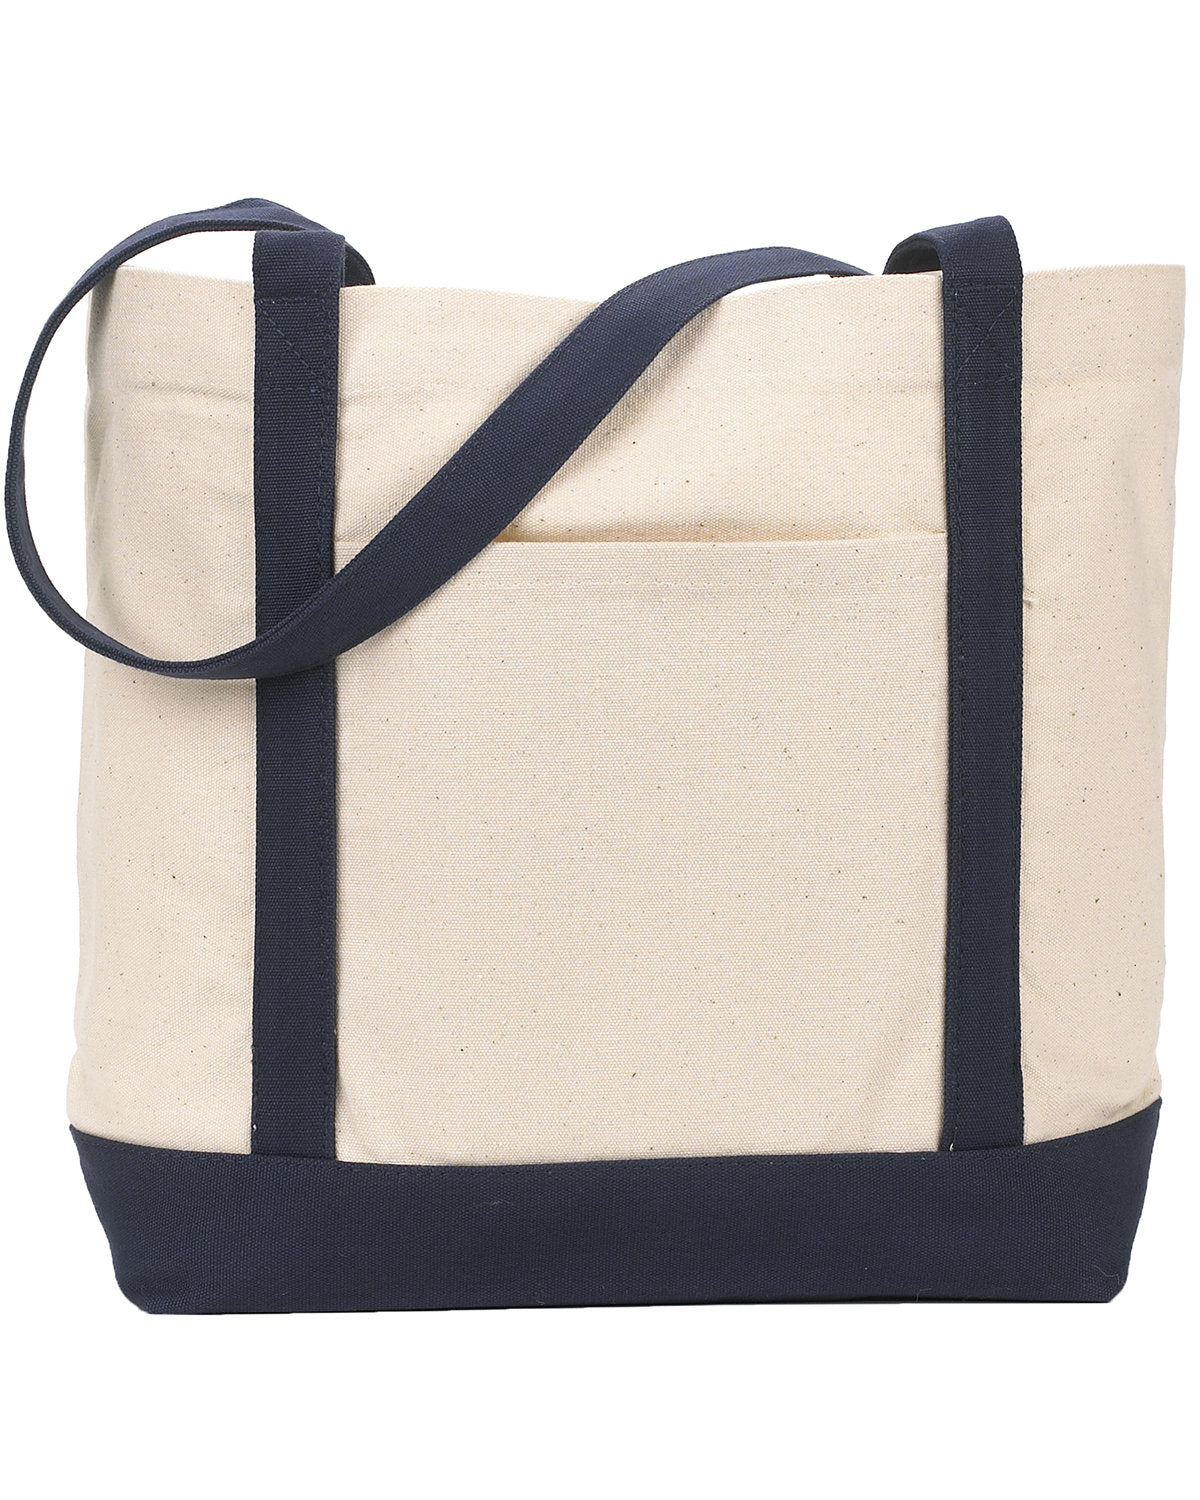 Bags and Accessories NATURAL/ NAVY OS Gemline